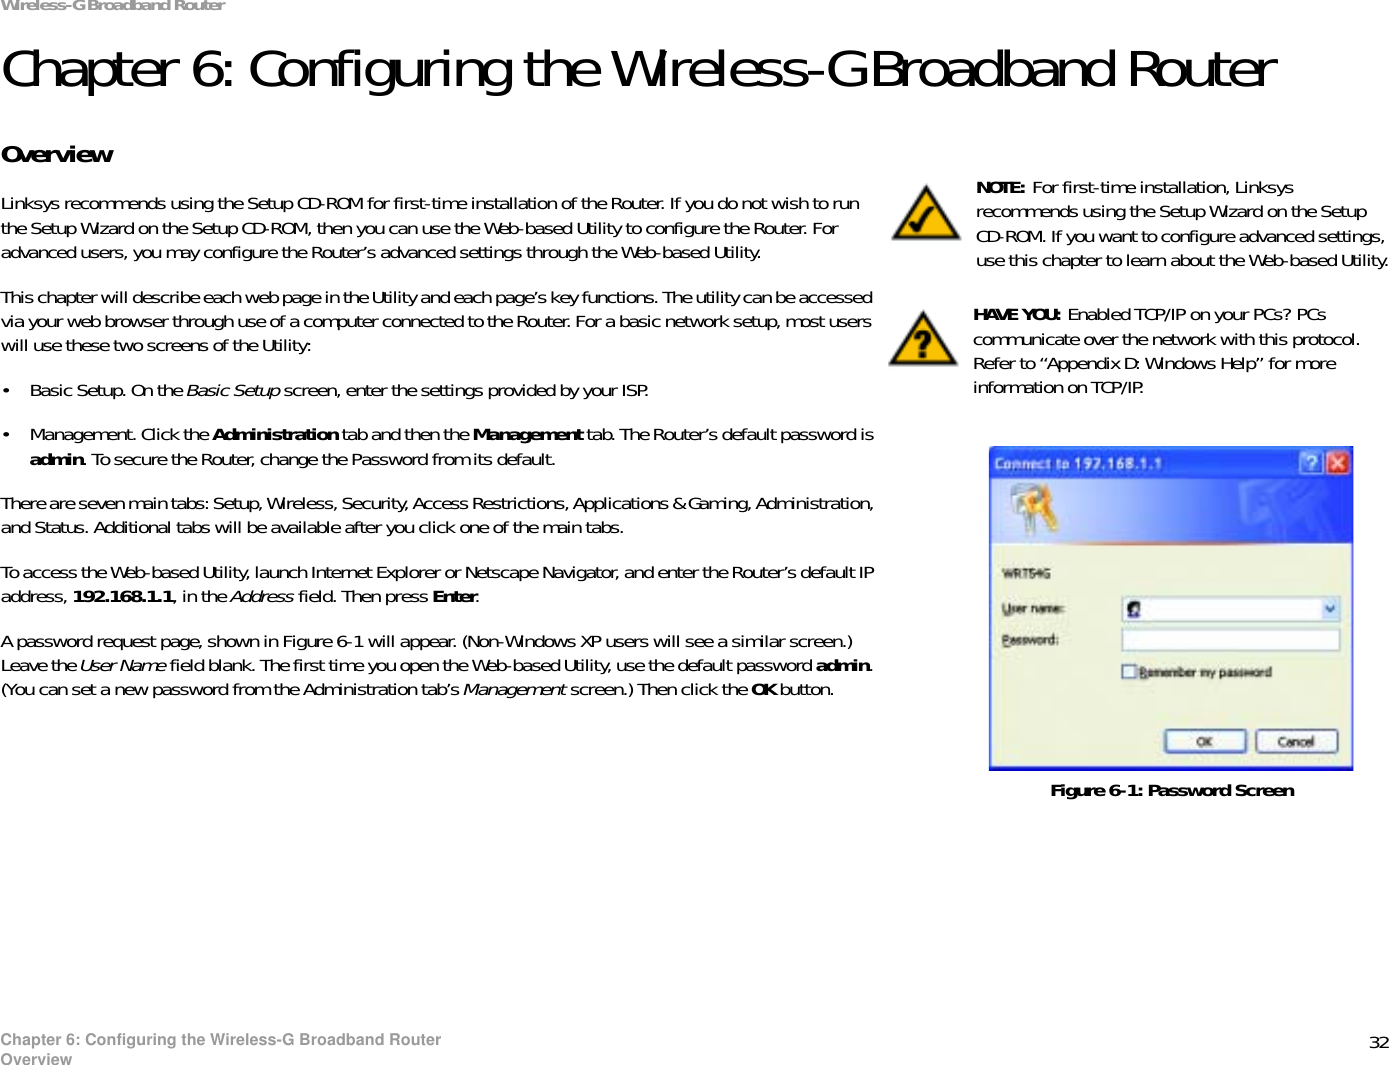 32Chapter 6: Configuring the Wireless-G Broadband RouterOverviewWireless-G Broadband RouterChapter 6: Configuring the Wireless-G Broadband RouterOverviewLinksys recommends using the Setup CD-ROM for first-time installation of the Router. If you do not wish to run the Setup Wizard on the Setup CD-ROM, then you can use the Web-based Utility to configure the Router. For advanced users, you may configure the Router’s advanced settings through the Web-based Utility.This chapter will describe each web page in the Utility and each page’s key functions. The utility can be accessed via your web browser through use of a computer connected to the Router. For a basic network setup, most users will use these two screens of the Utility:• Basic Setup. On the Basic Setup screen, enter the settings provided by your ISP.• Management. Click the Administration tab and then the Management tab. The Router’s default password is admin. To secure the Router, change the Password from its default.There are seven main tabs: Setup, Wireless, Security, Access Restrictions, Applications &amp; Gaming, Administration, and Status. Additional tabs will be available after you click one of the main tabs.To access the Web-based Utility, launch Internet Explorer or Netscape Navigator, and enter the Router’s default IP address, 192.168.1.1, in the Address field. Then press Enter.A password request page, shown in Figure 6-1 will appear. (Non-Windows XP users will see a similar screen.) Leave the User Name field blank. The first time you open the Web-based Utility, use the default password admin.(You can set a new password from the Administration tab’s Management screen.) Then click the OK button. HAVE YOU: Enabled TCP/IP on your PCs? PCs communicate over the network with this protocol. Refer to “Appendix D: Windows Help” for more information on TCP/IP.NOTE: For first-time installation, Linksys recommends using the Setup Wizard on the Setup CD-ROM. If you want to configure advanced settings, use this chapter to learn about the Web-based Utility.Figure 6-1: Password Screen